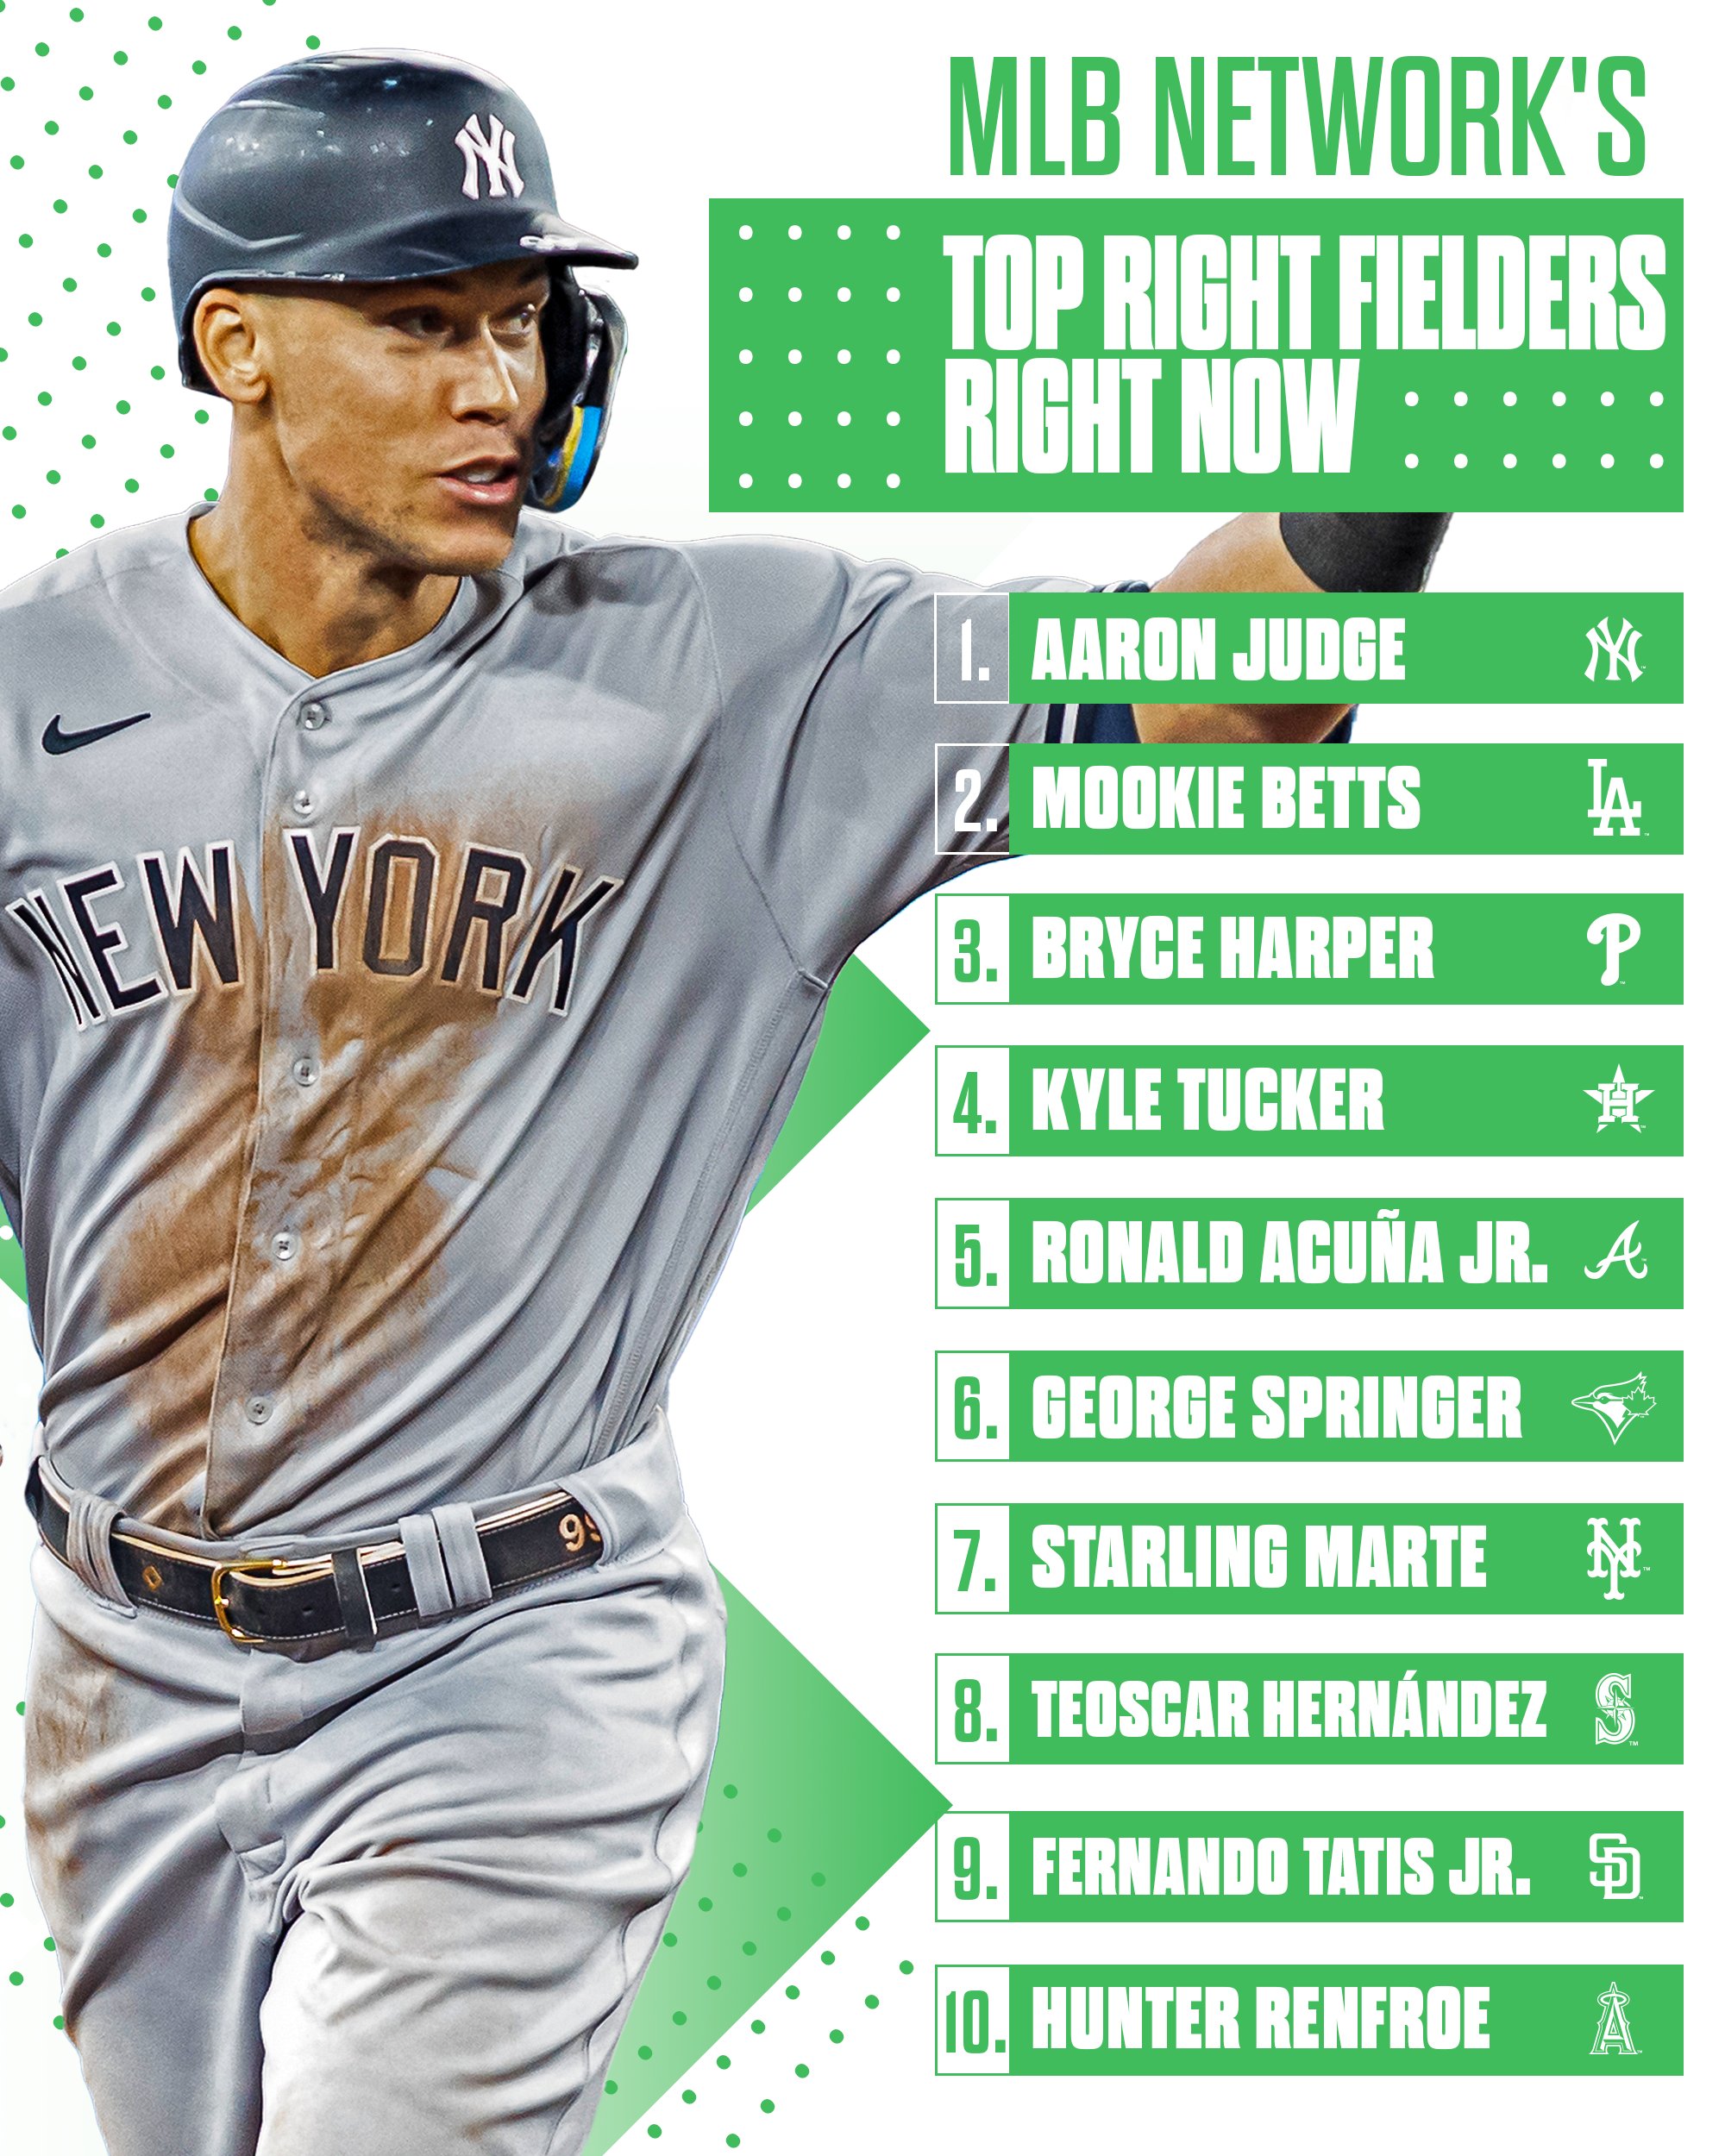 strøm undergrundsbane sammenhængende MLB on Twitter: "Aaron Judge is atop MLB Network's Top 10 Right Fielders  list! What does your Top 10 look like? https://t.co/20kSySiqaY" / Twitter